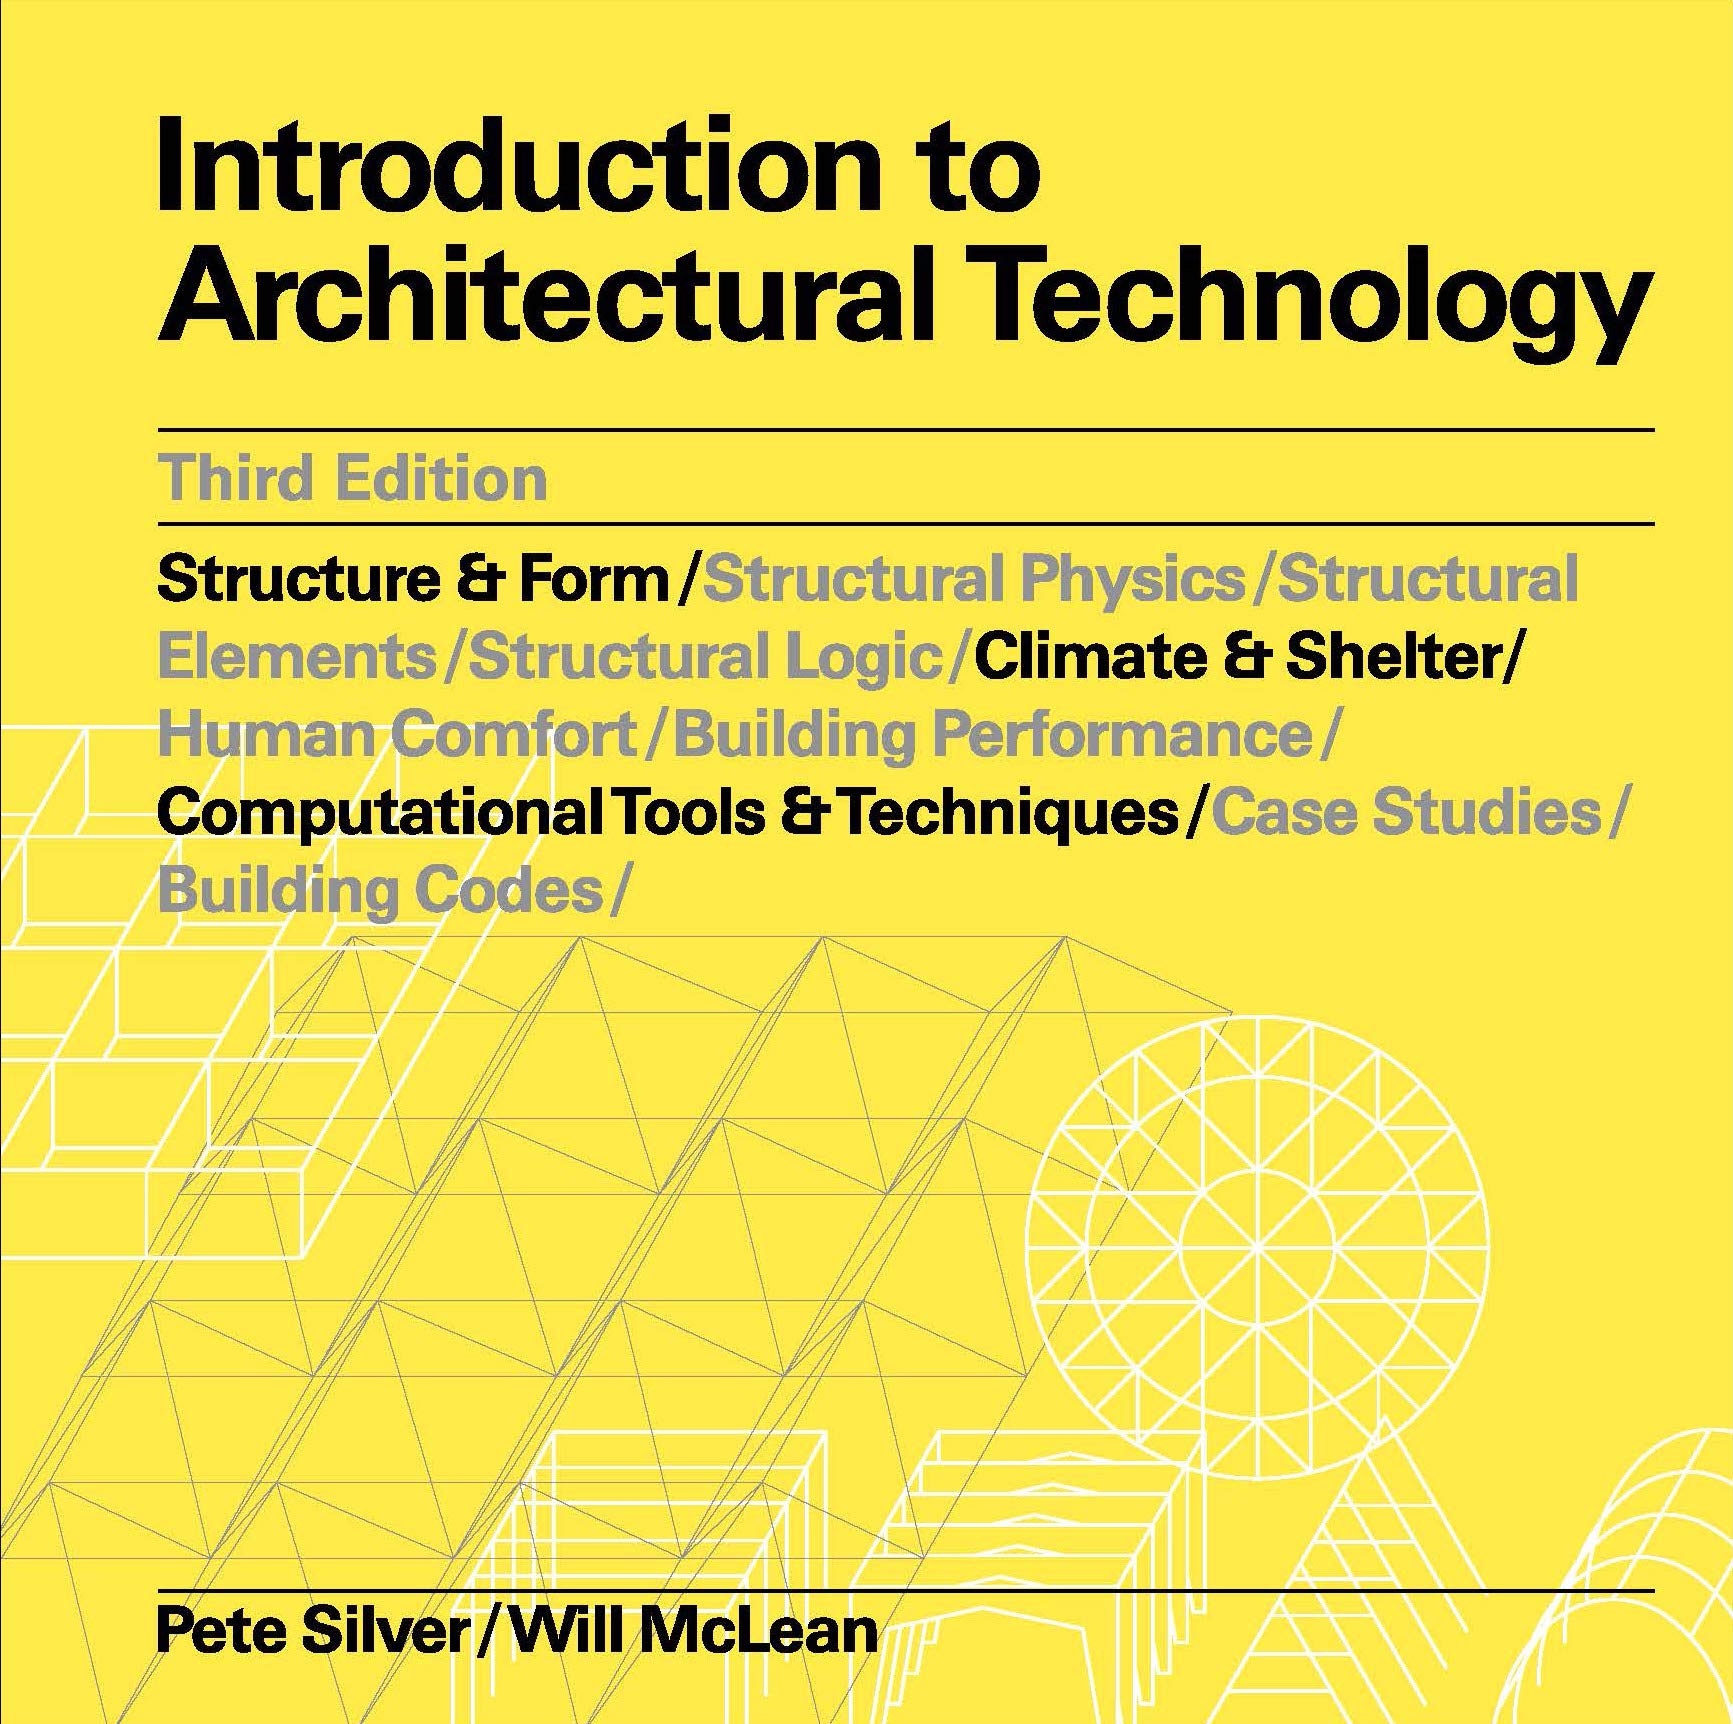 Pete Silver, William McLean - Introduction to Architectural Technology